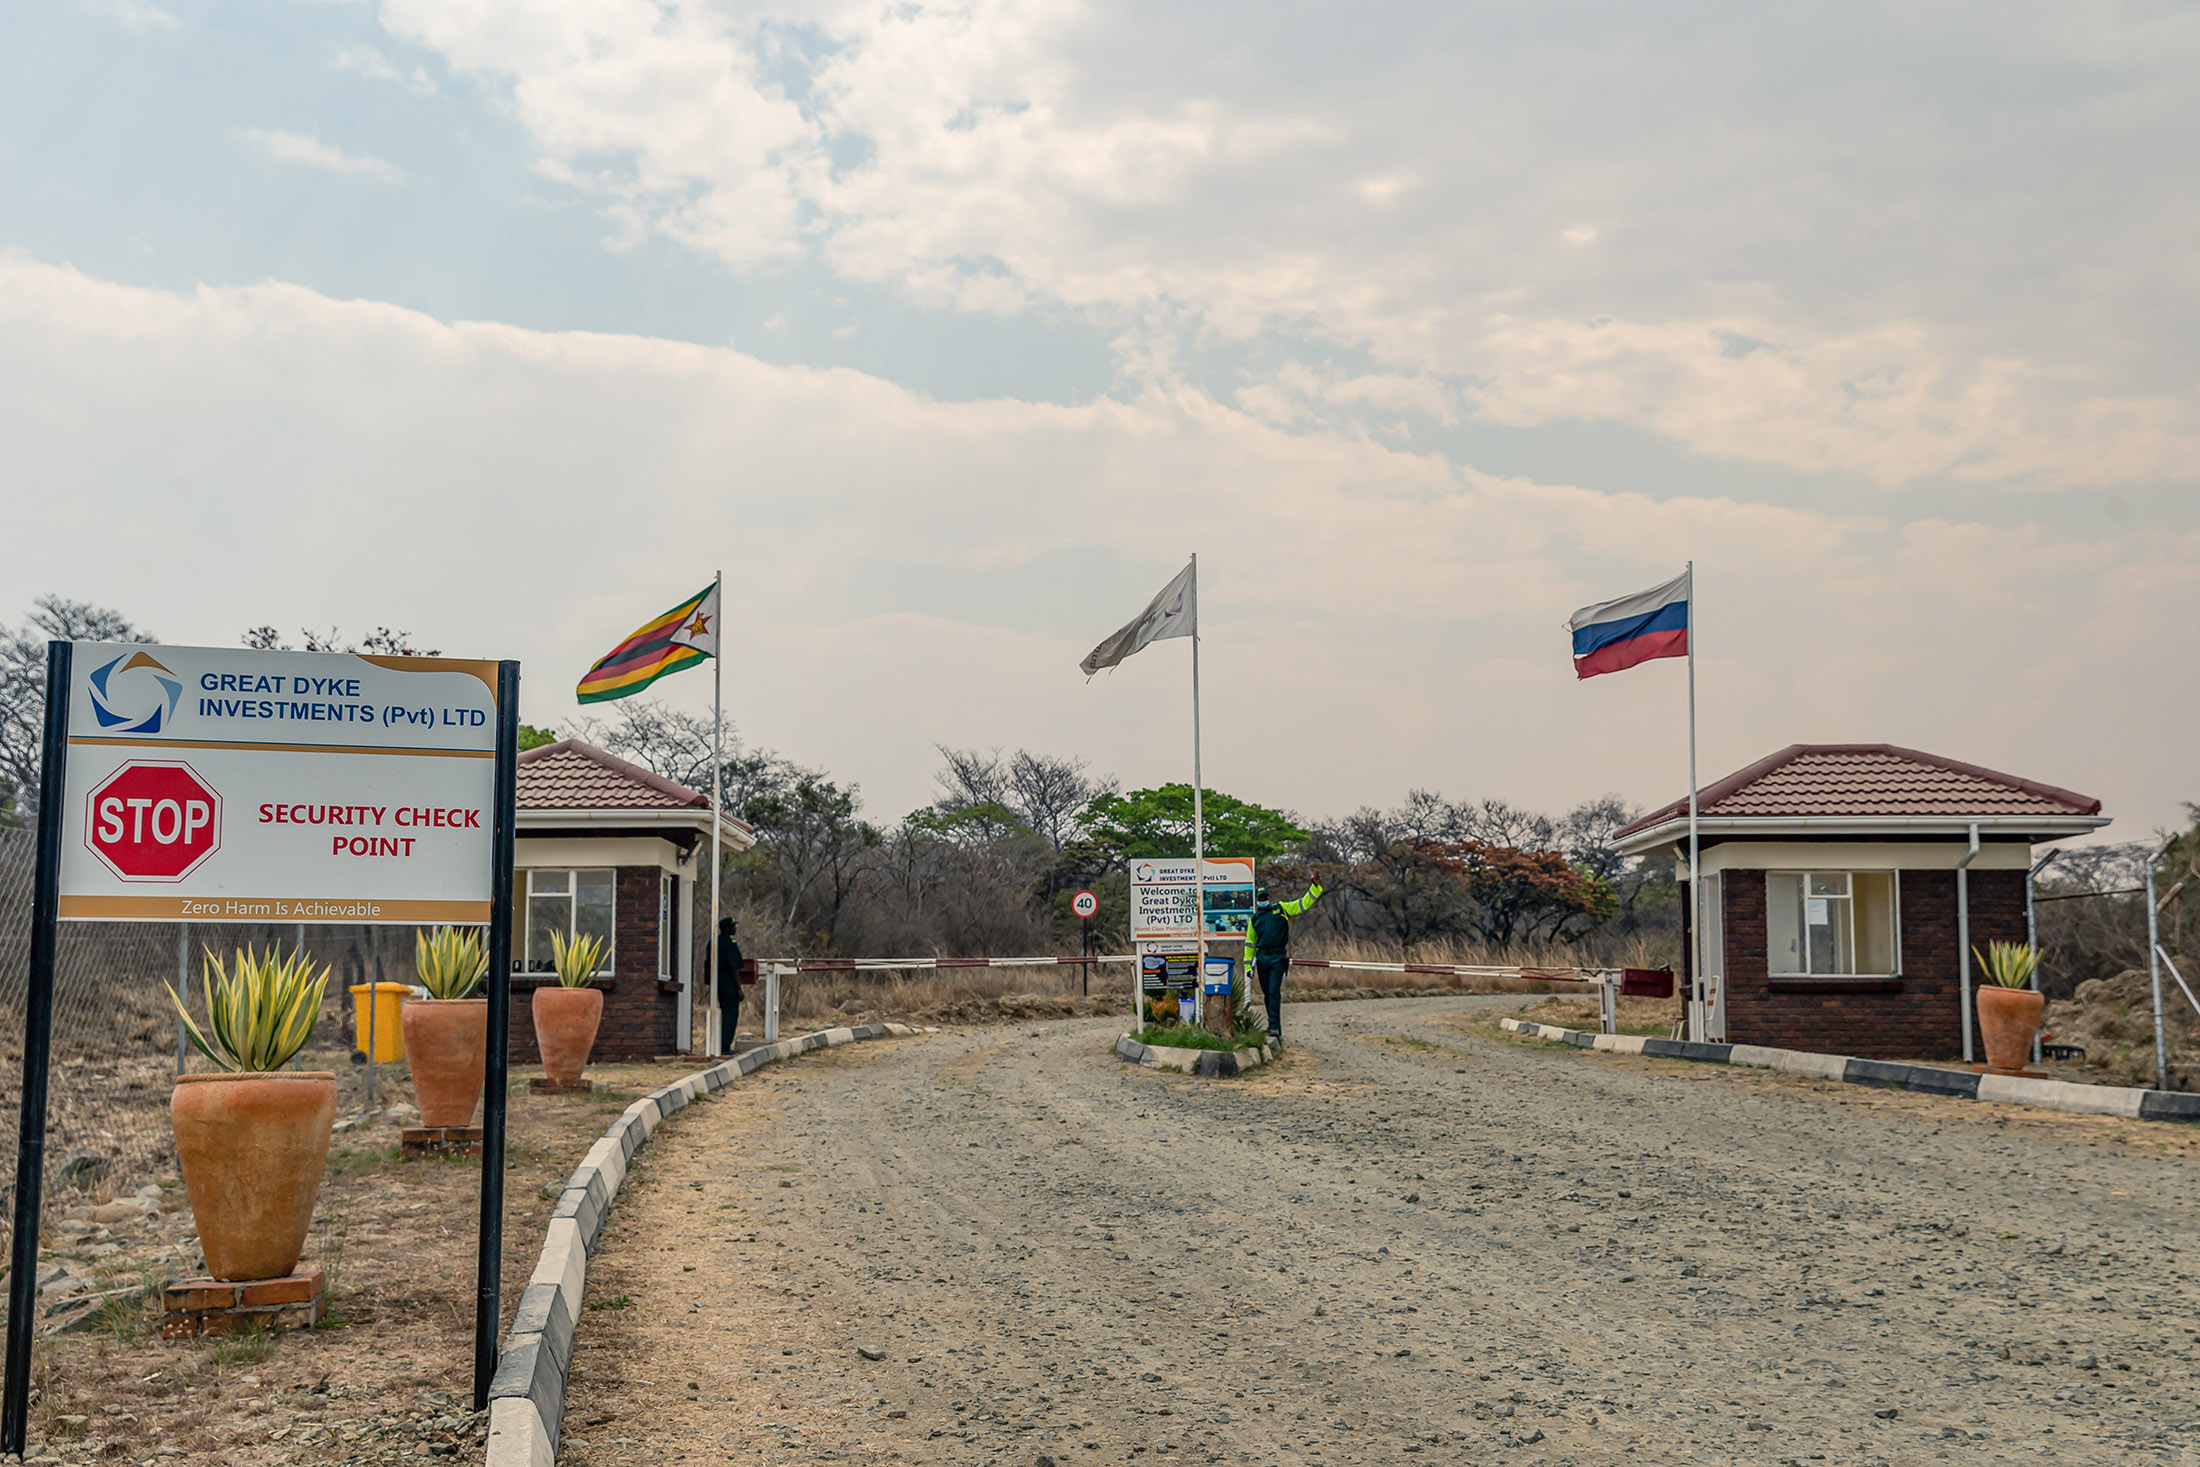 A security guard stands at the entrance gates of the Great Dyke Investments project in Zimbabwe.